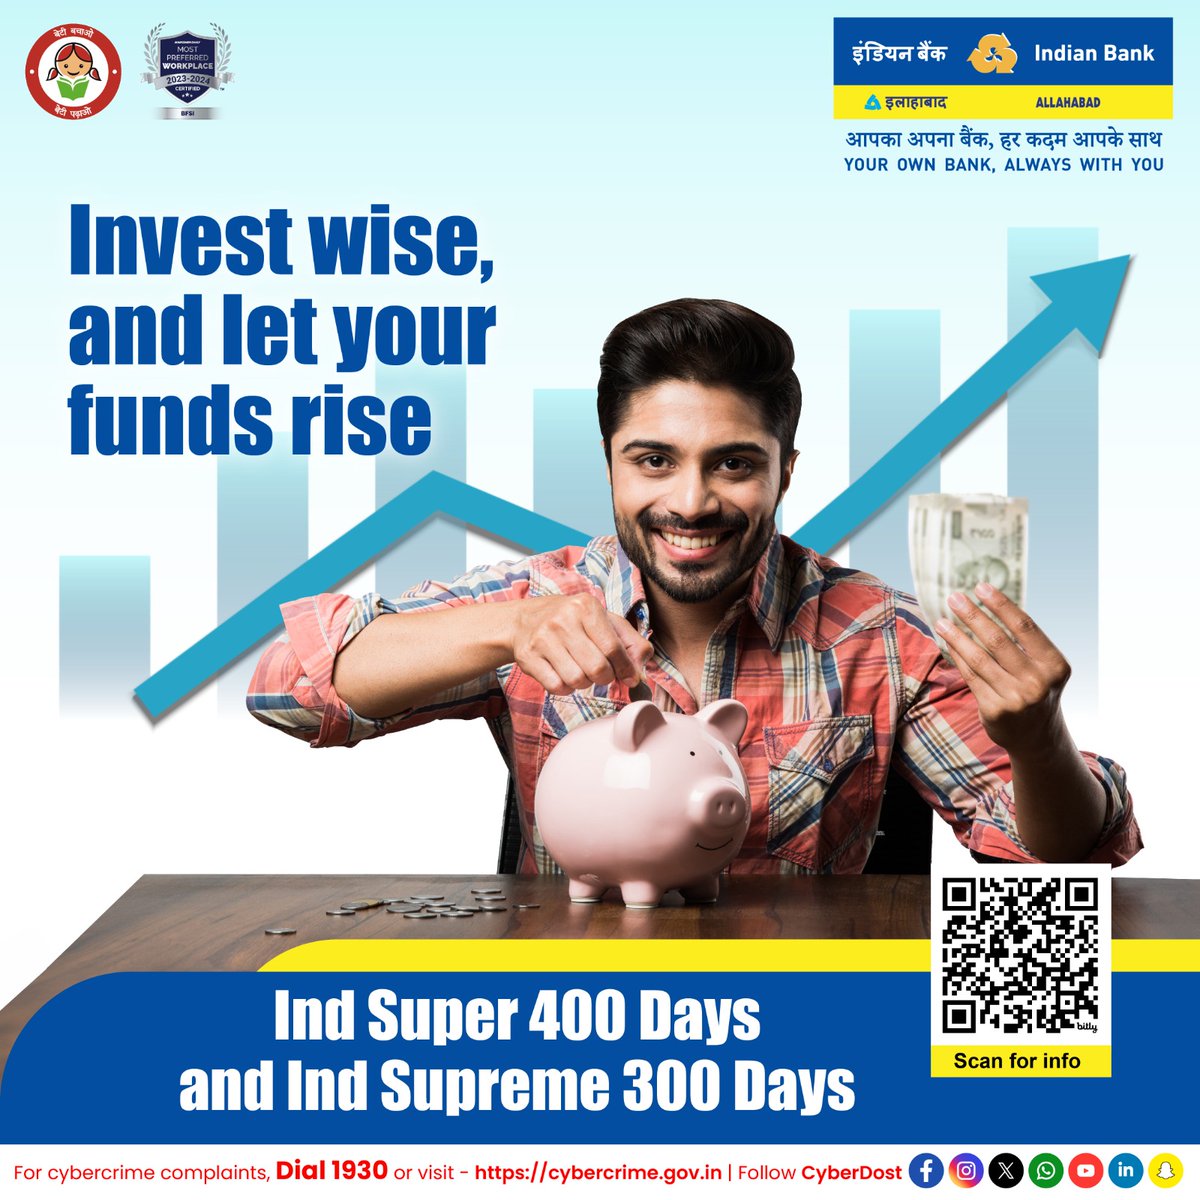 Welcome to a world where savings meet superior returns with Ind Super 400 Days & Ind Supreme 300 Days. Maximize your earnings with our special deposit schemes and reach your financial goals with ease. Know More : bit.ly/IB_TermDeposits #IndianBank @DFS_India